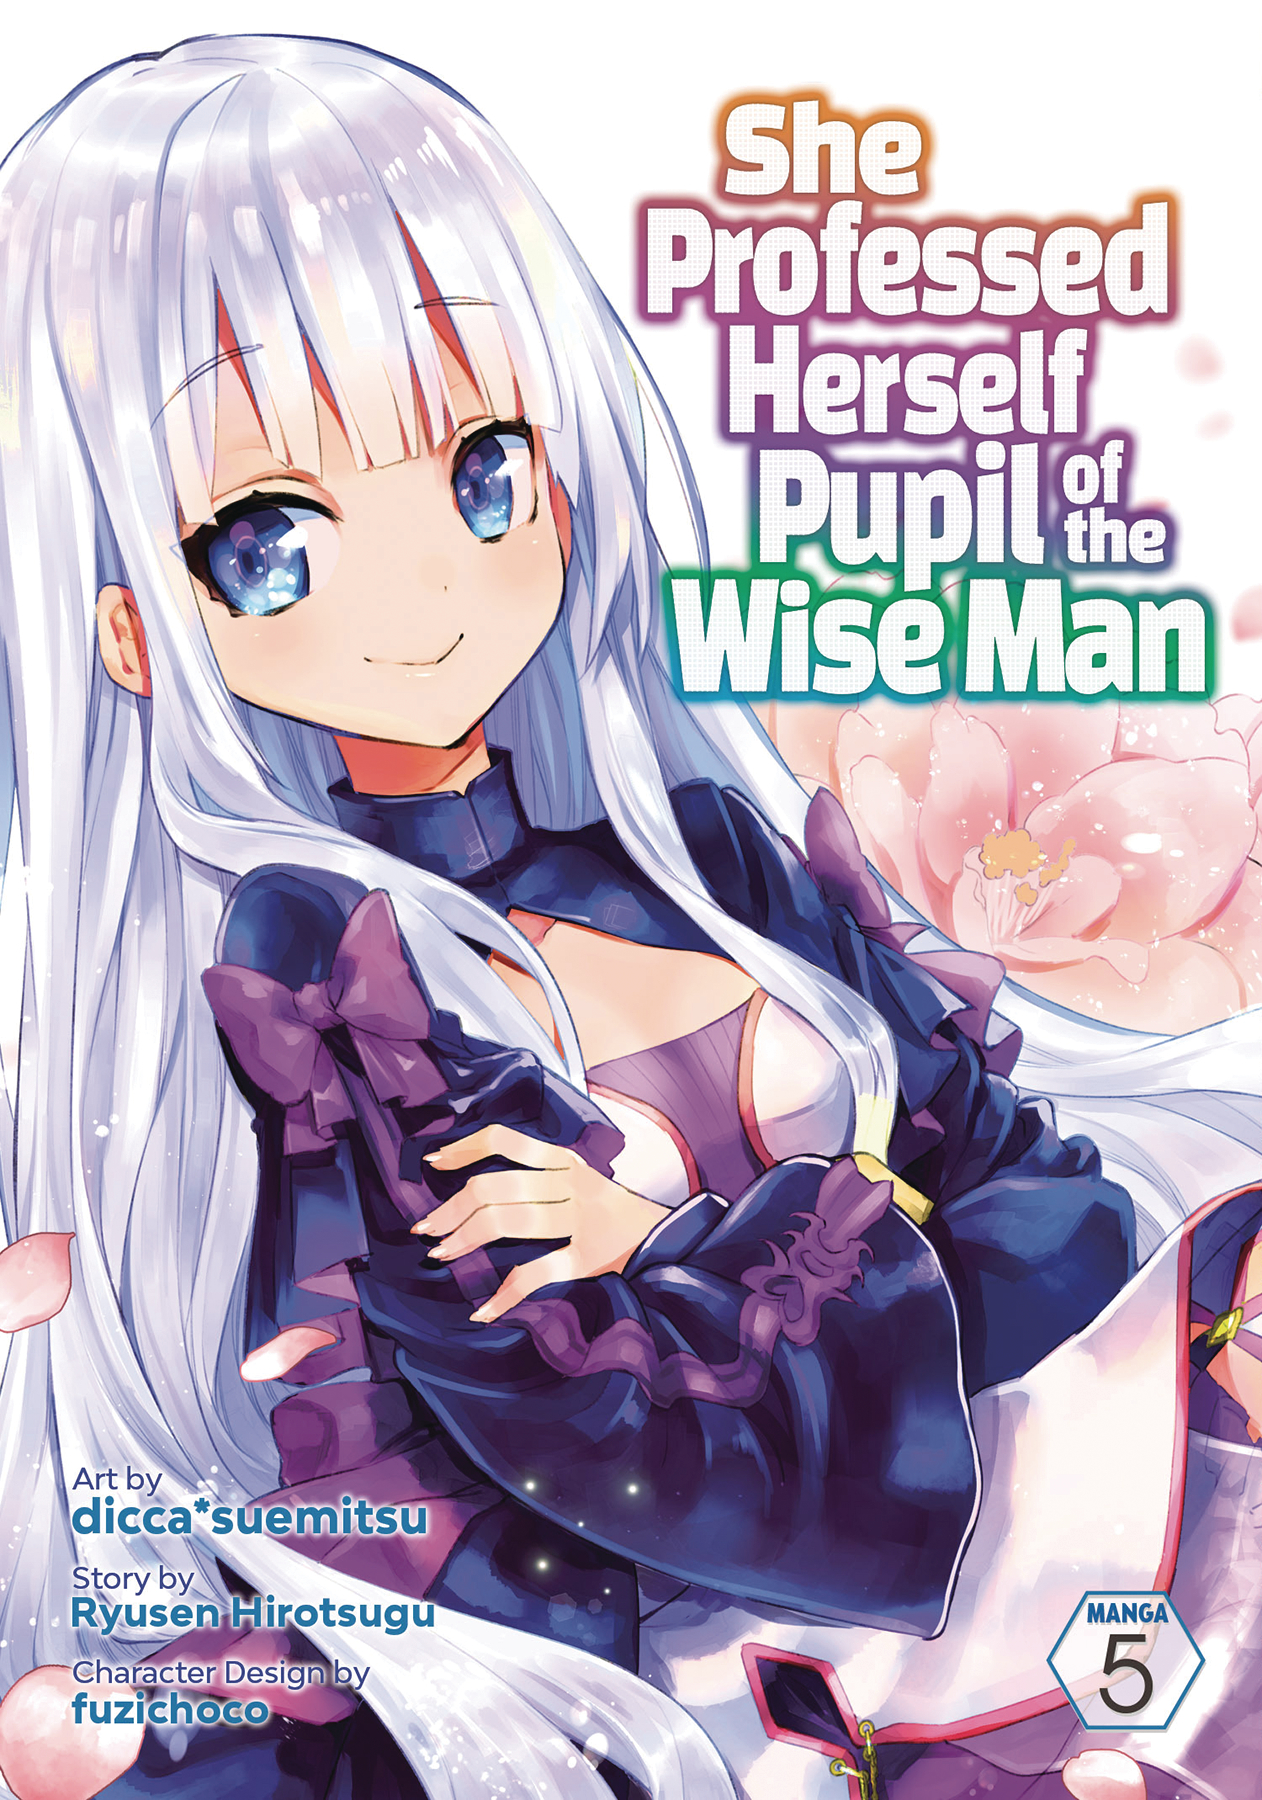 She Professed Herself Pupil of the Wise Man Manga Volume 5